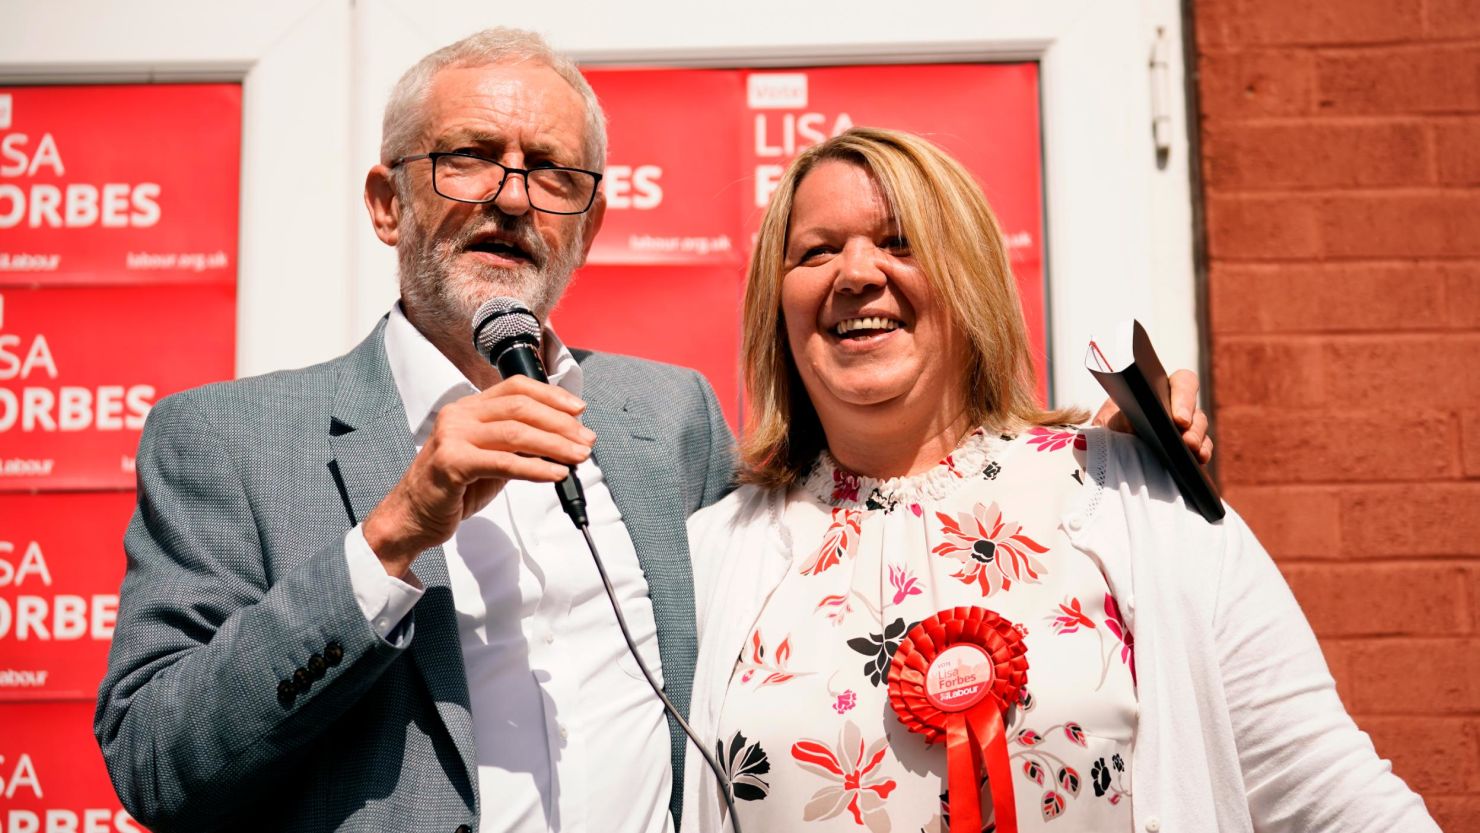 British Labour Party leader Jeremy Corbyn and the party's prospective parliamentary candidate Lisa Forbes talk to supporters in the run up to the Peterborough by-election on June 1, 2019 in Peterborough, England. 